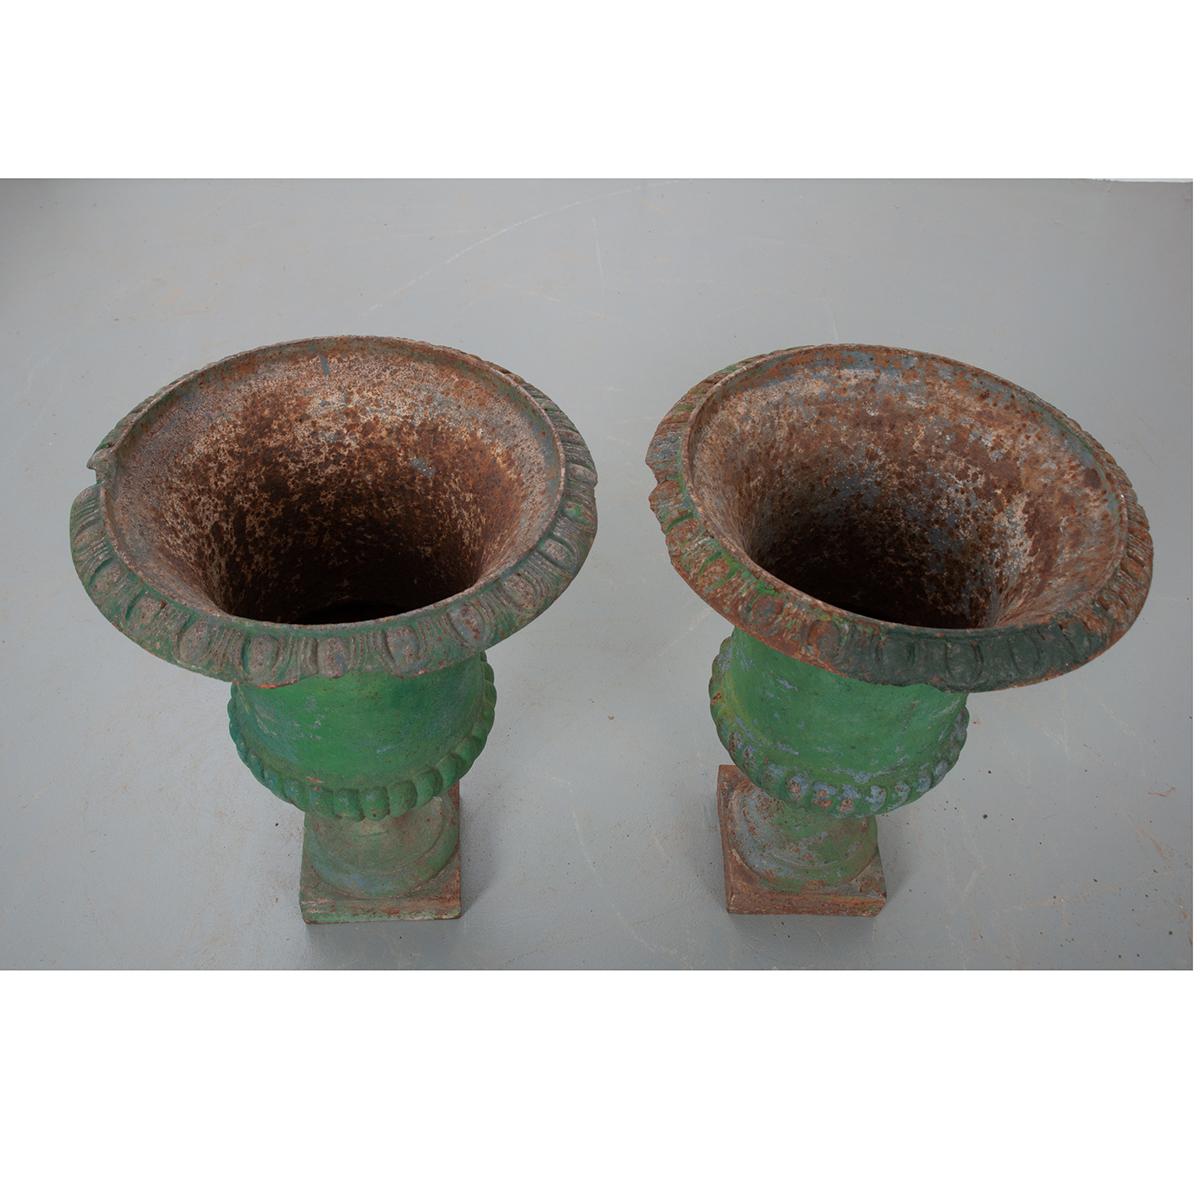 A fantastic pair of classical cast iron pots from 19th century France. These pots have multiple layers of paint with different colors showing through its incredible, aged patina. Both urns are equipped with a drain and could be used both indoors and